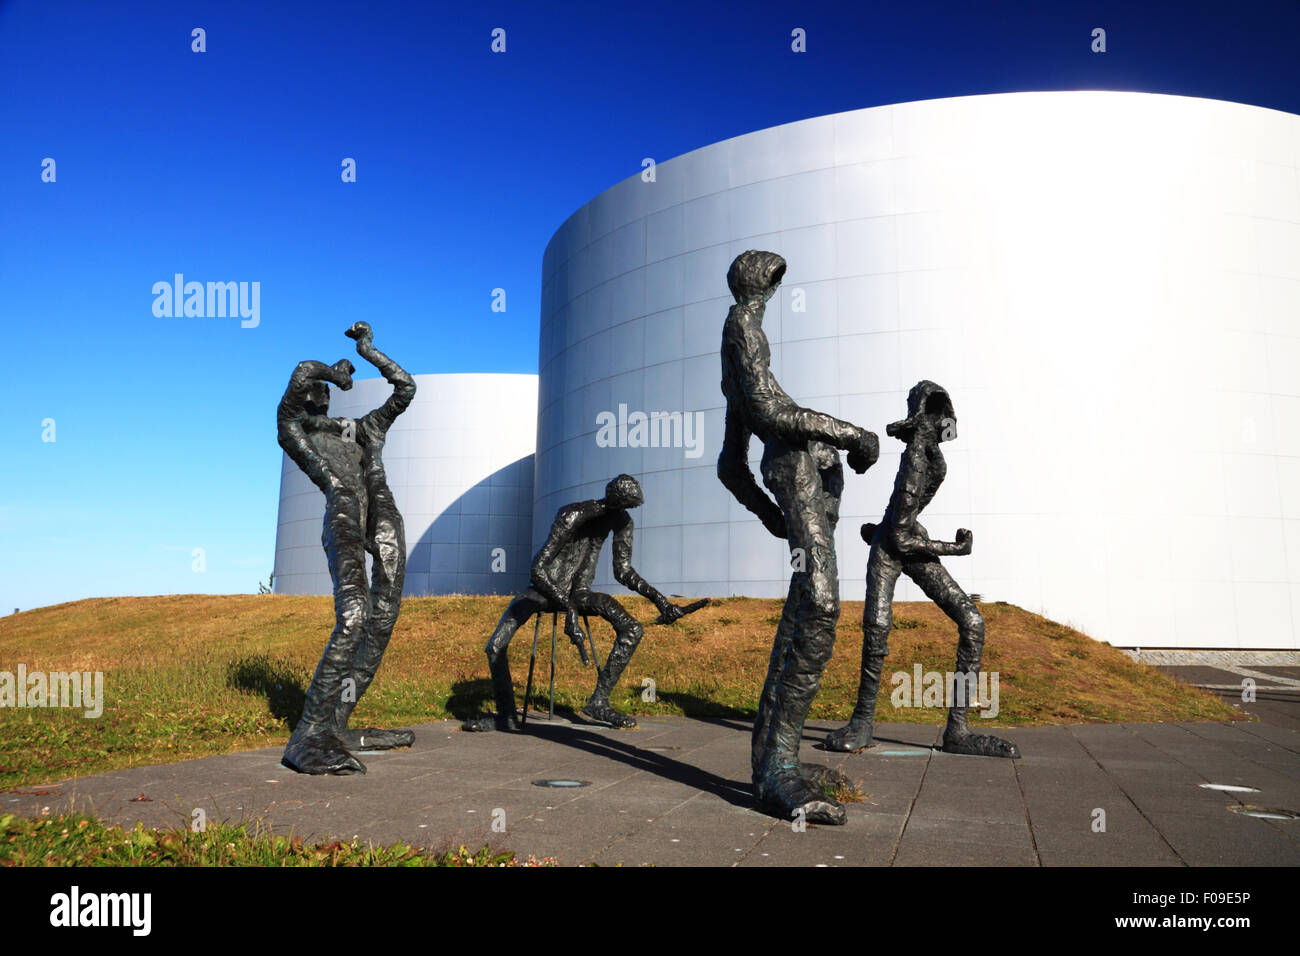 A group of bronze figures depicting musicians beside a group of metal storage tanks. Stock Photo